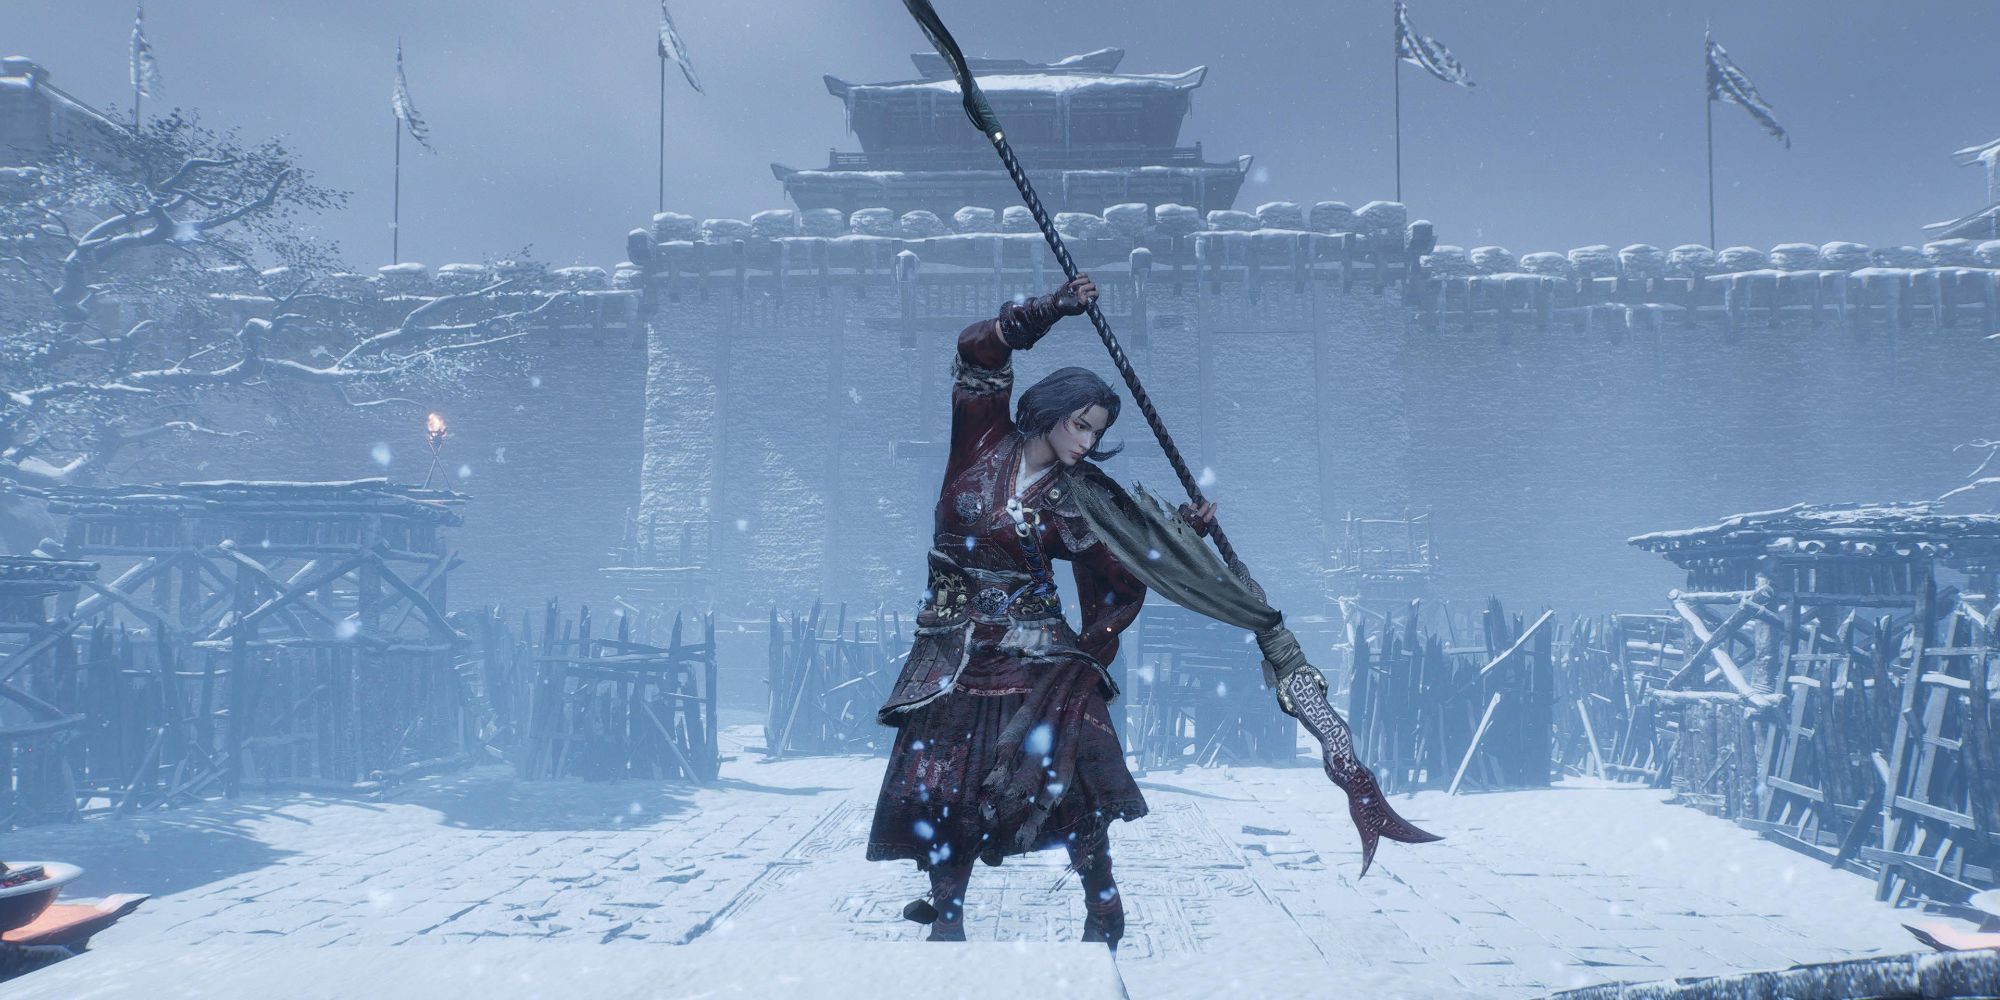 Wo Long: Fallen Dynasty - our character poses in the icy landscape holding their spear out